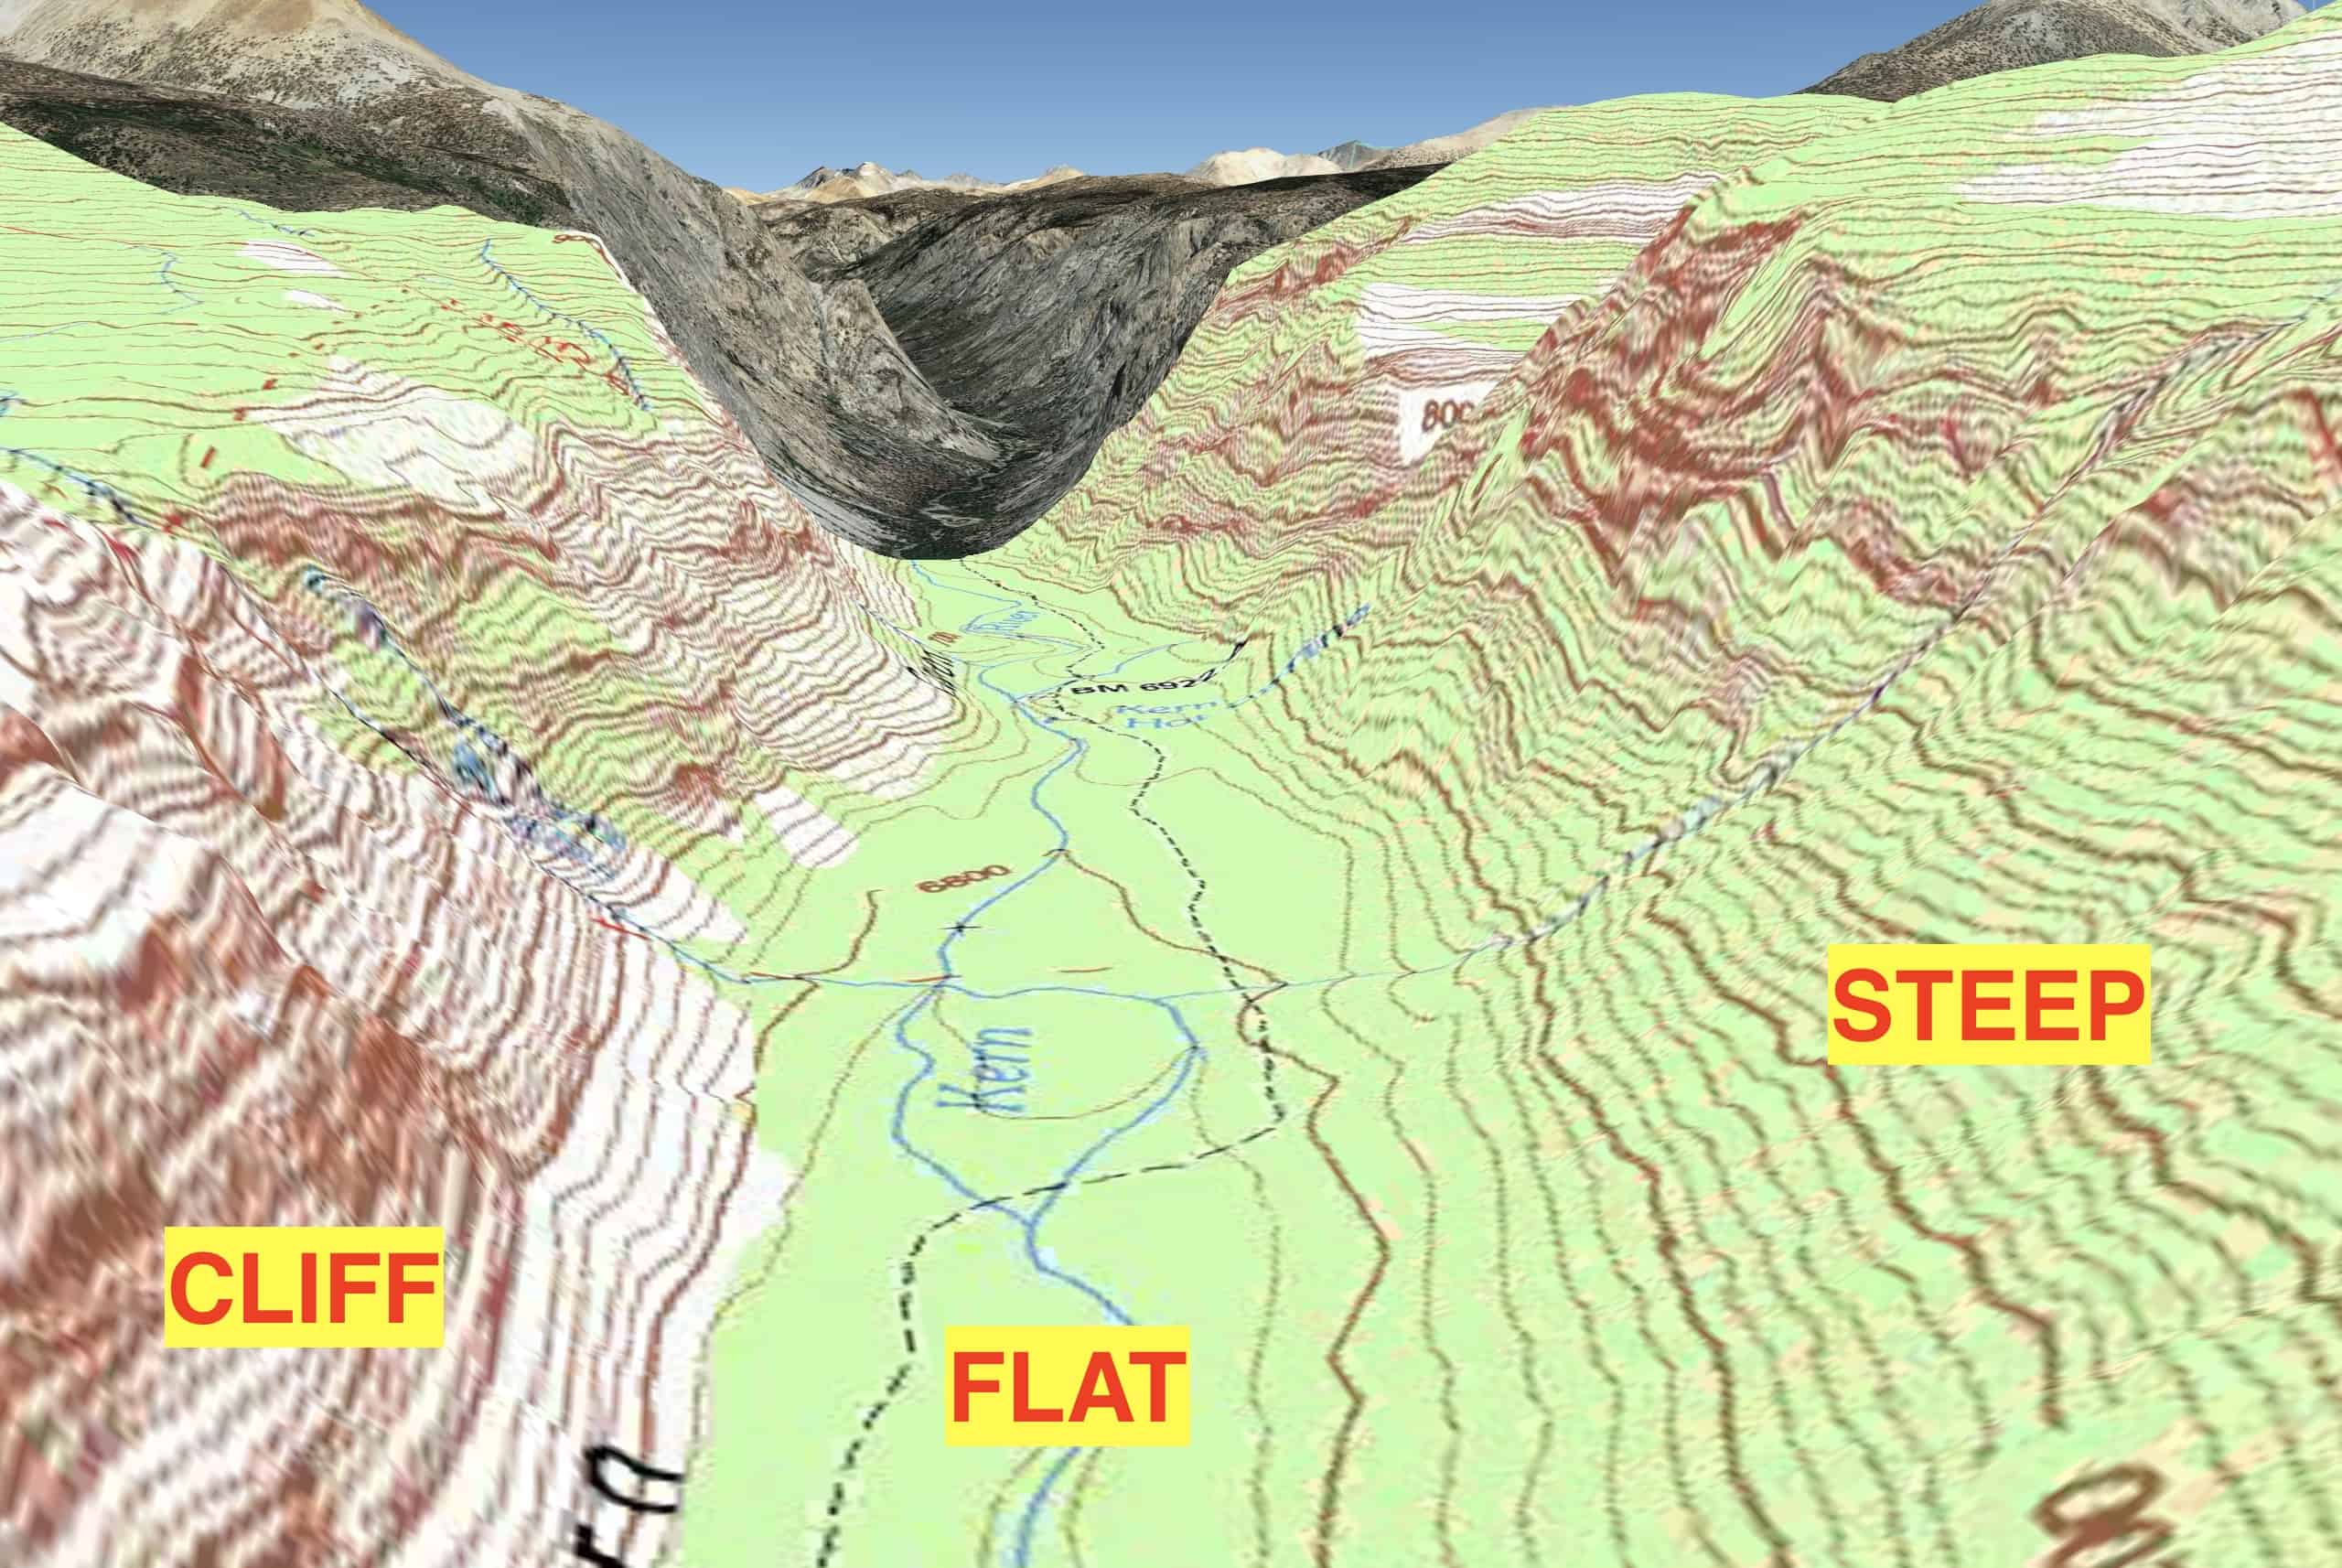 How To Learn A Topographic Map